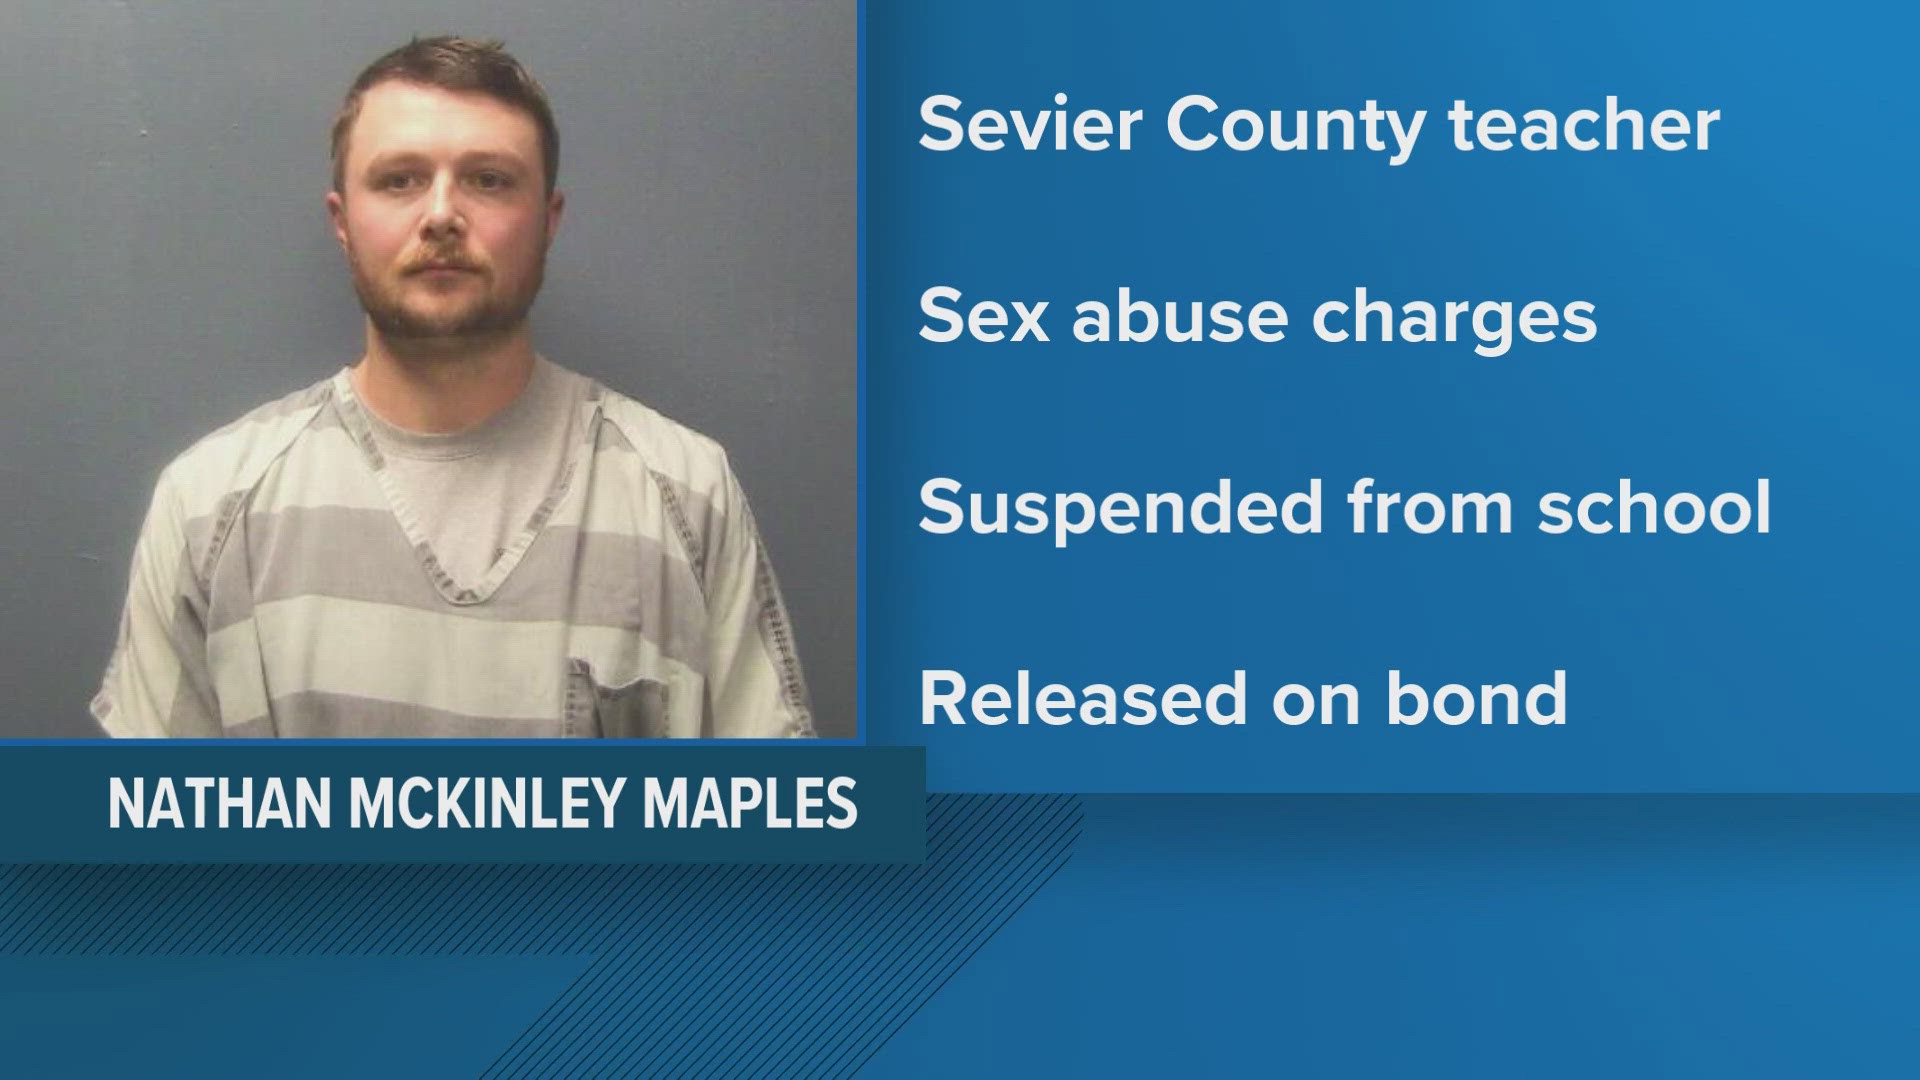 Sevier County Schools said it suspended 32-year-old Nathan McKinley Maples from Sevierville in February after learning about the allegations.